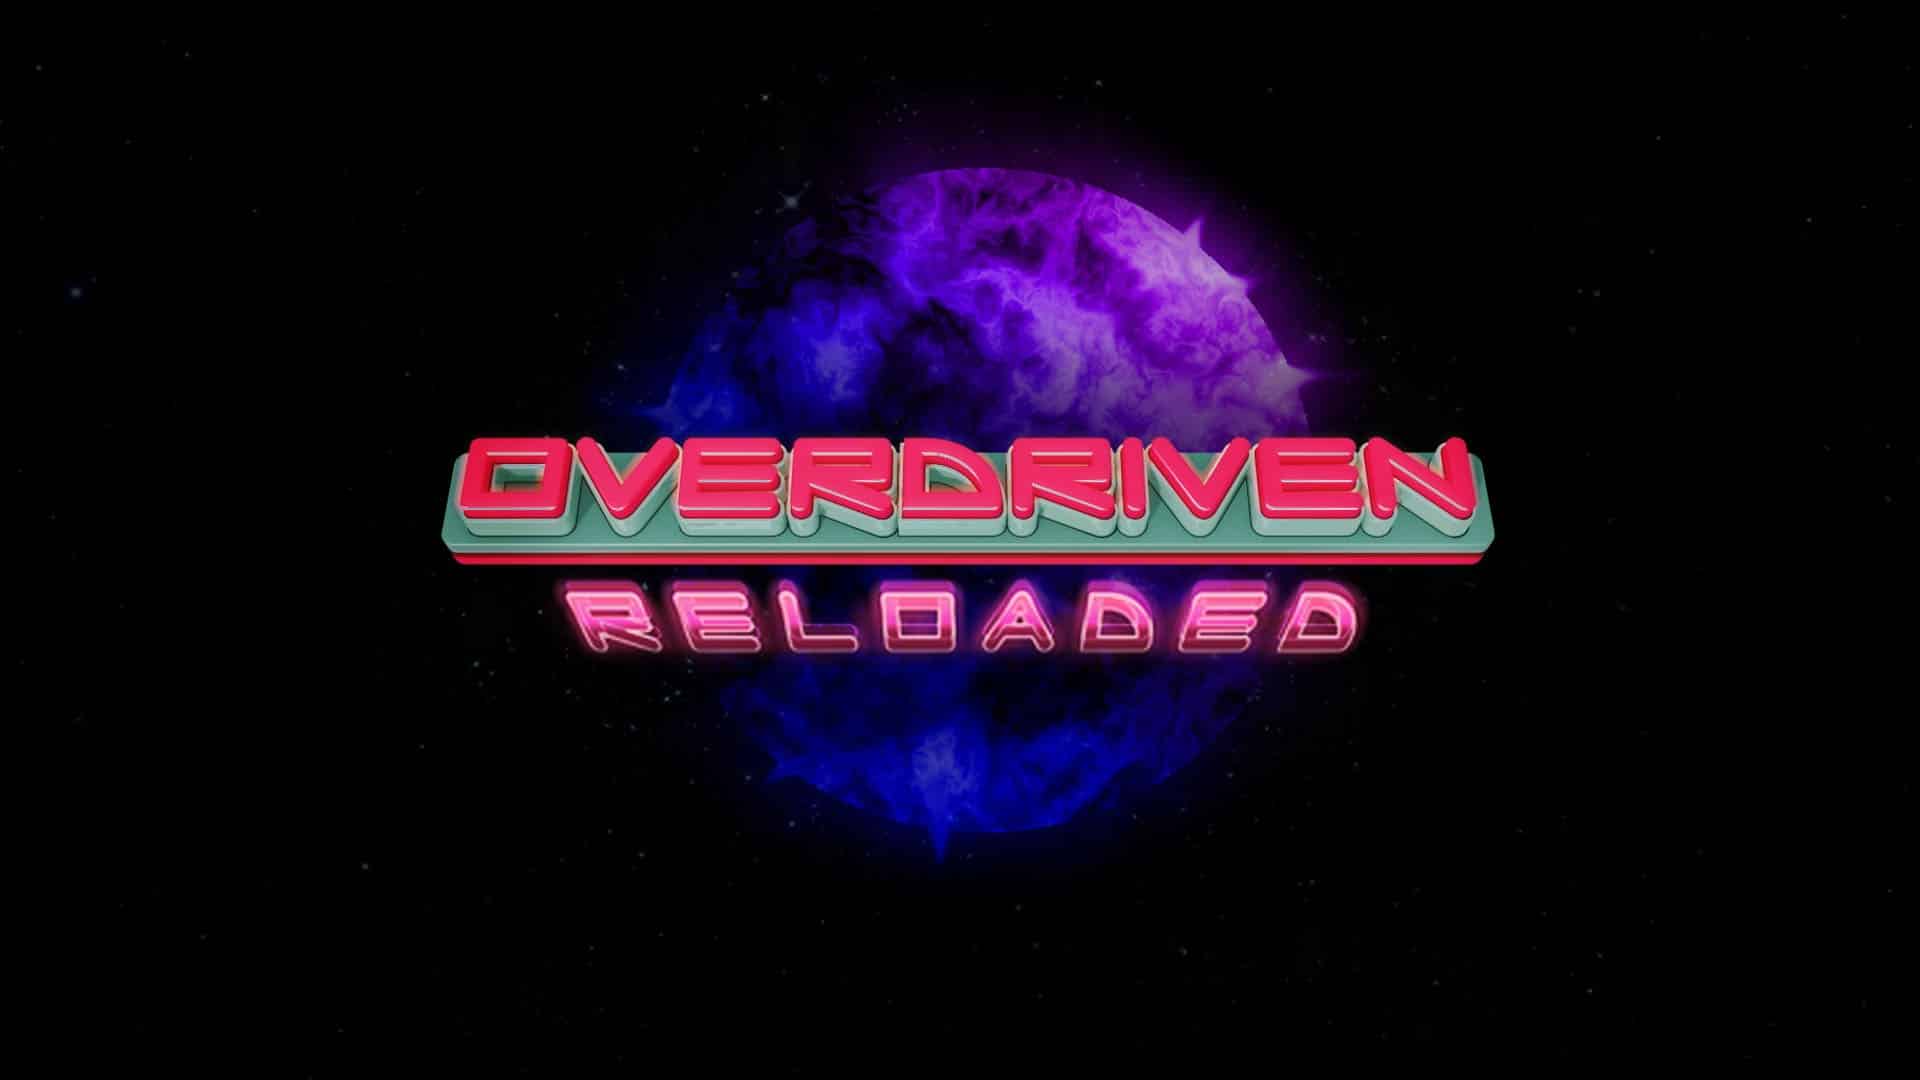 Overdriven Reloaded: Special Edition player count stats